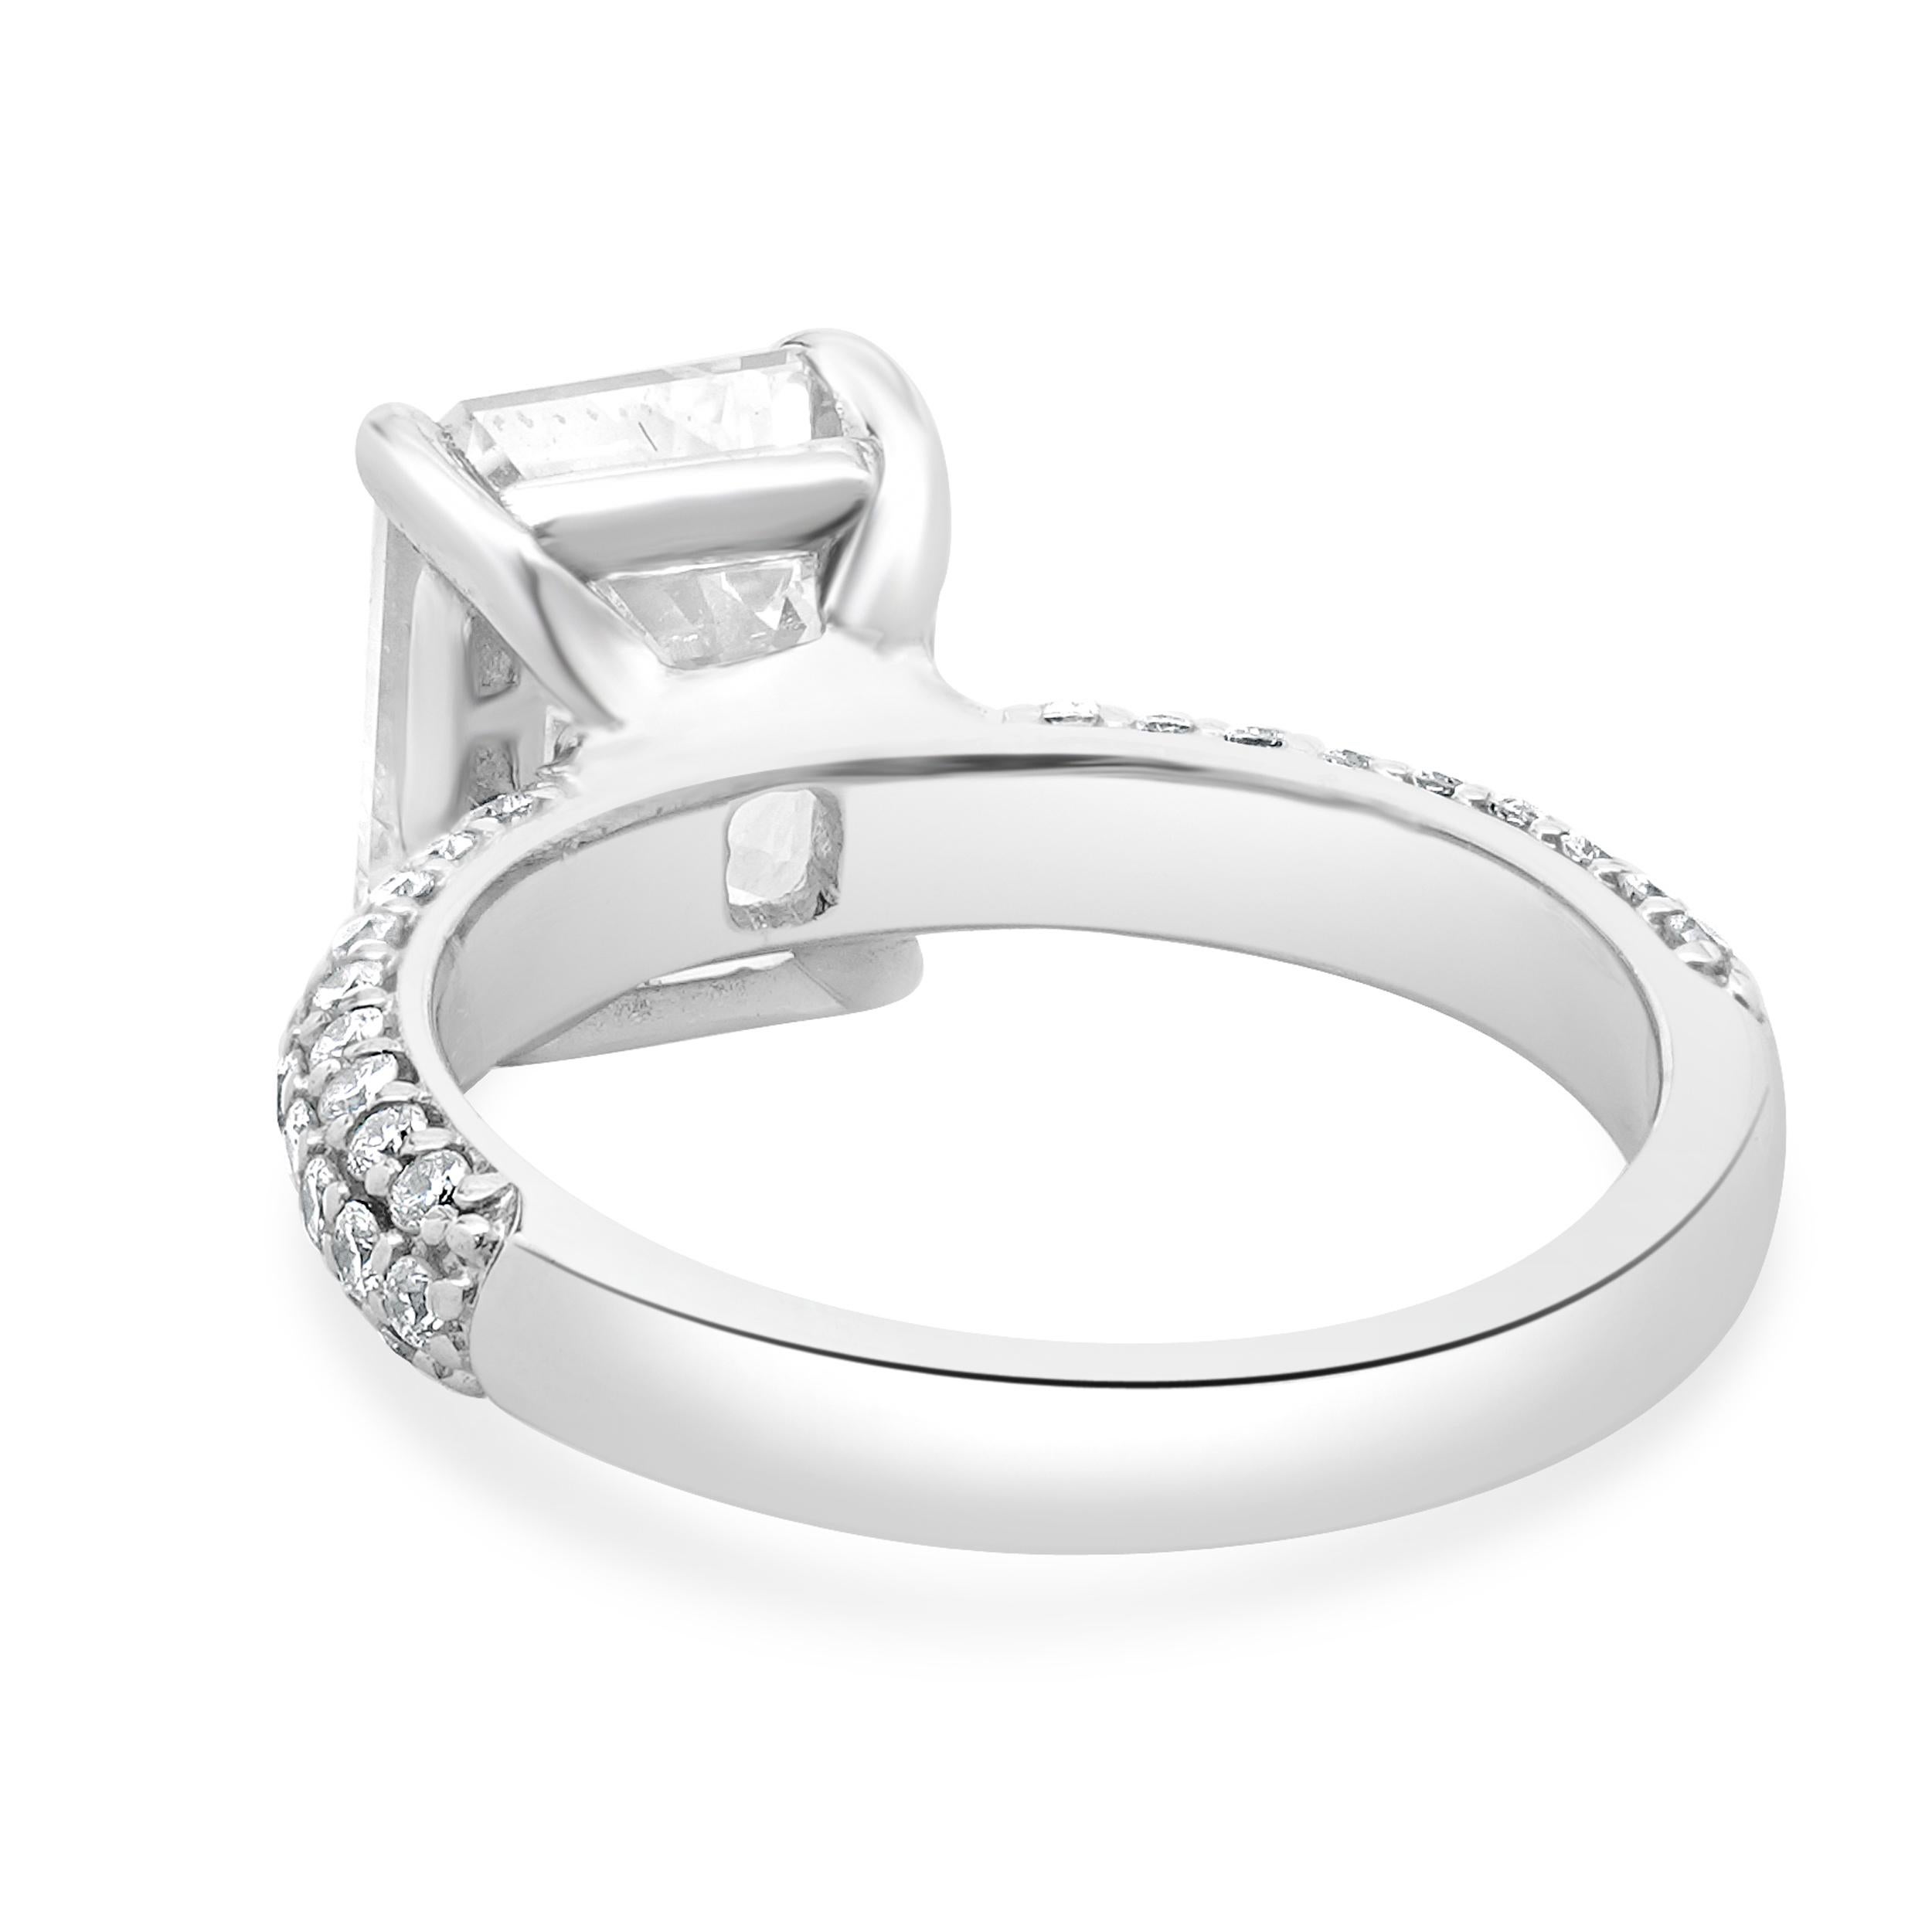 14 Karat White Gold Emerald Cut Diamond Engagement Ring In Excellent Condition For Sale In Scottsdale, AZ